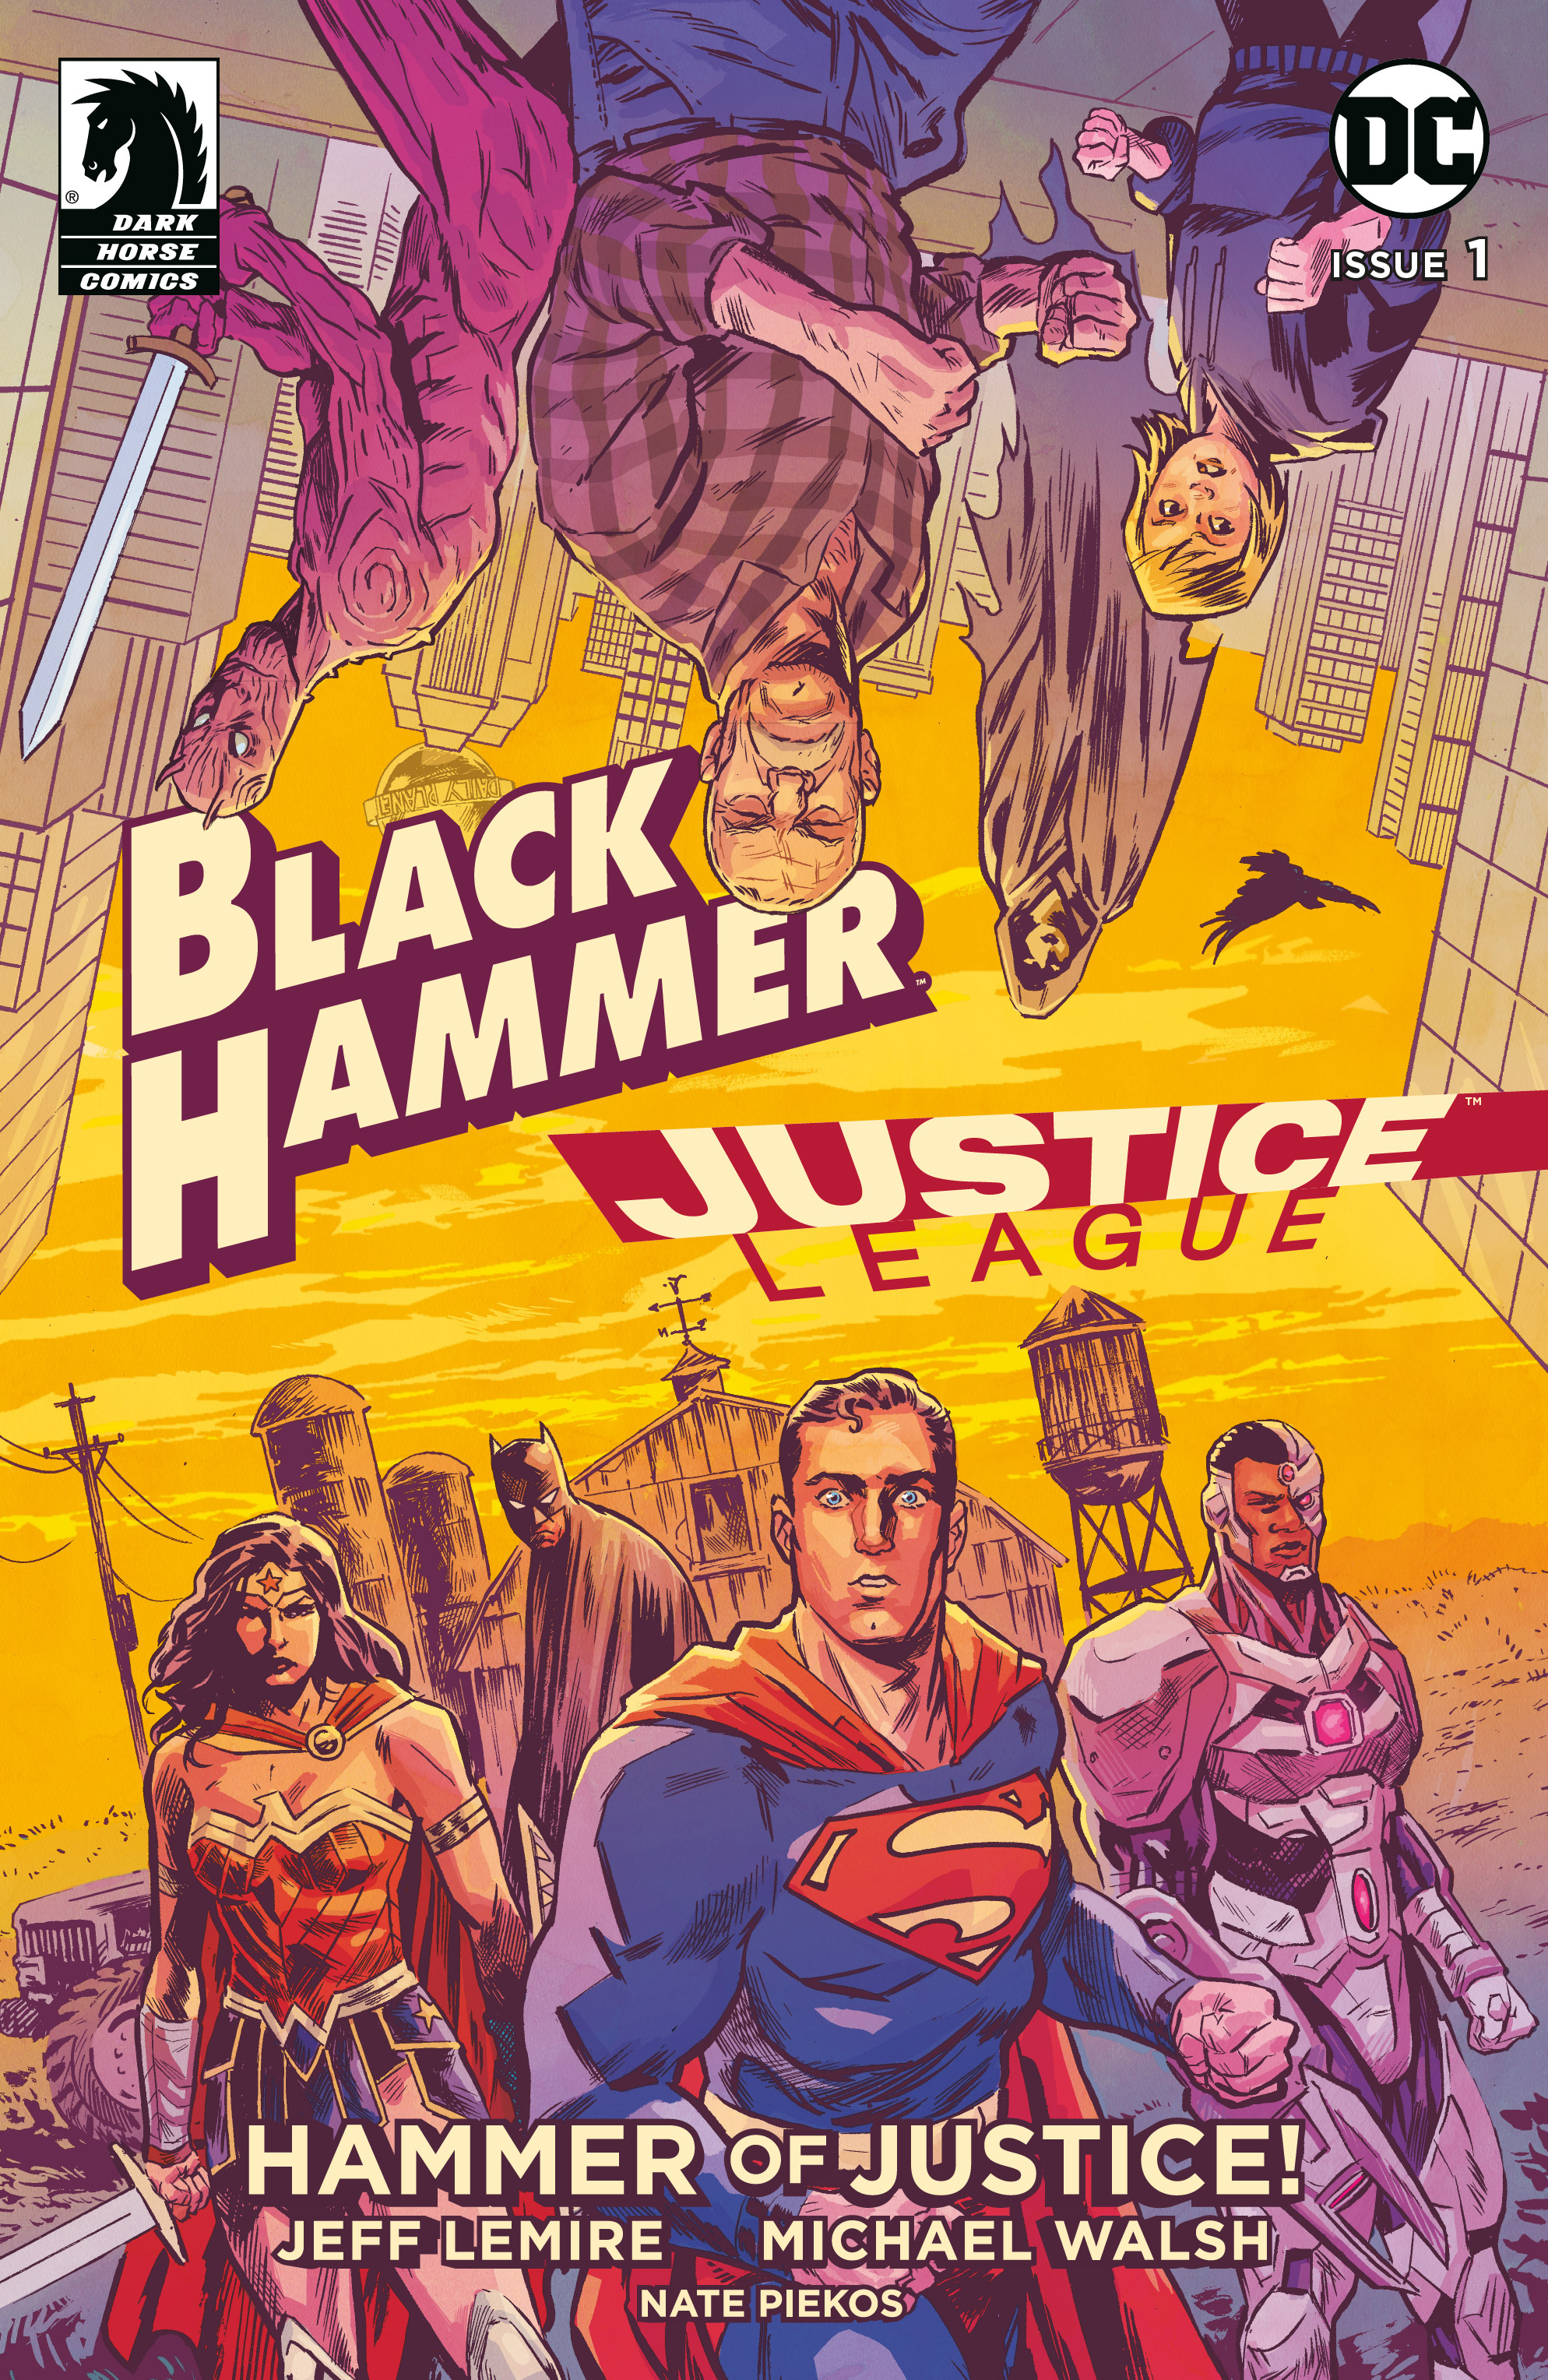 Black Hammer/Justice League: Hammer of Justice! (2019-): Chapter 1 - Page 1